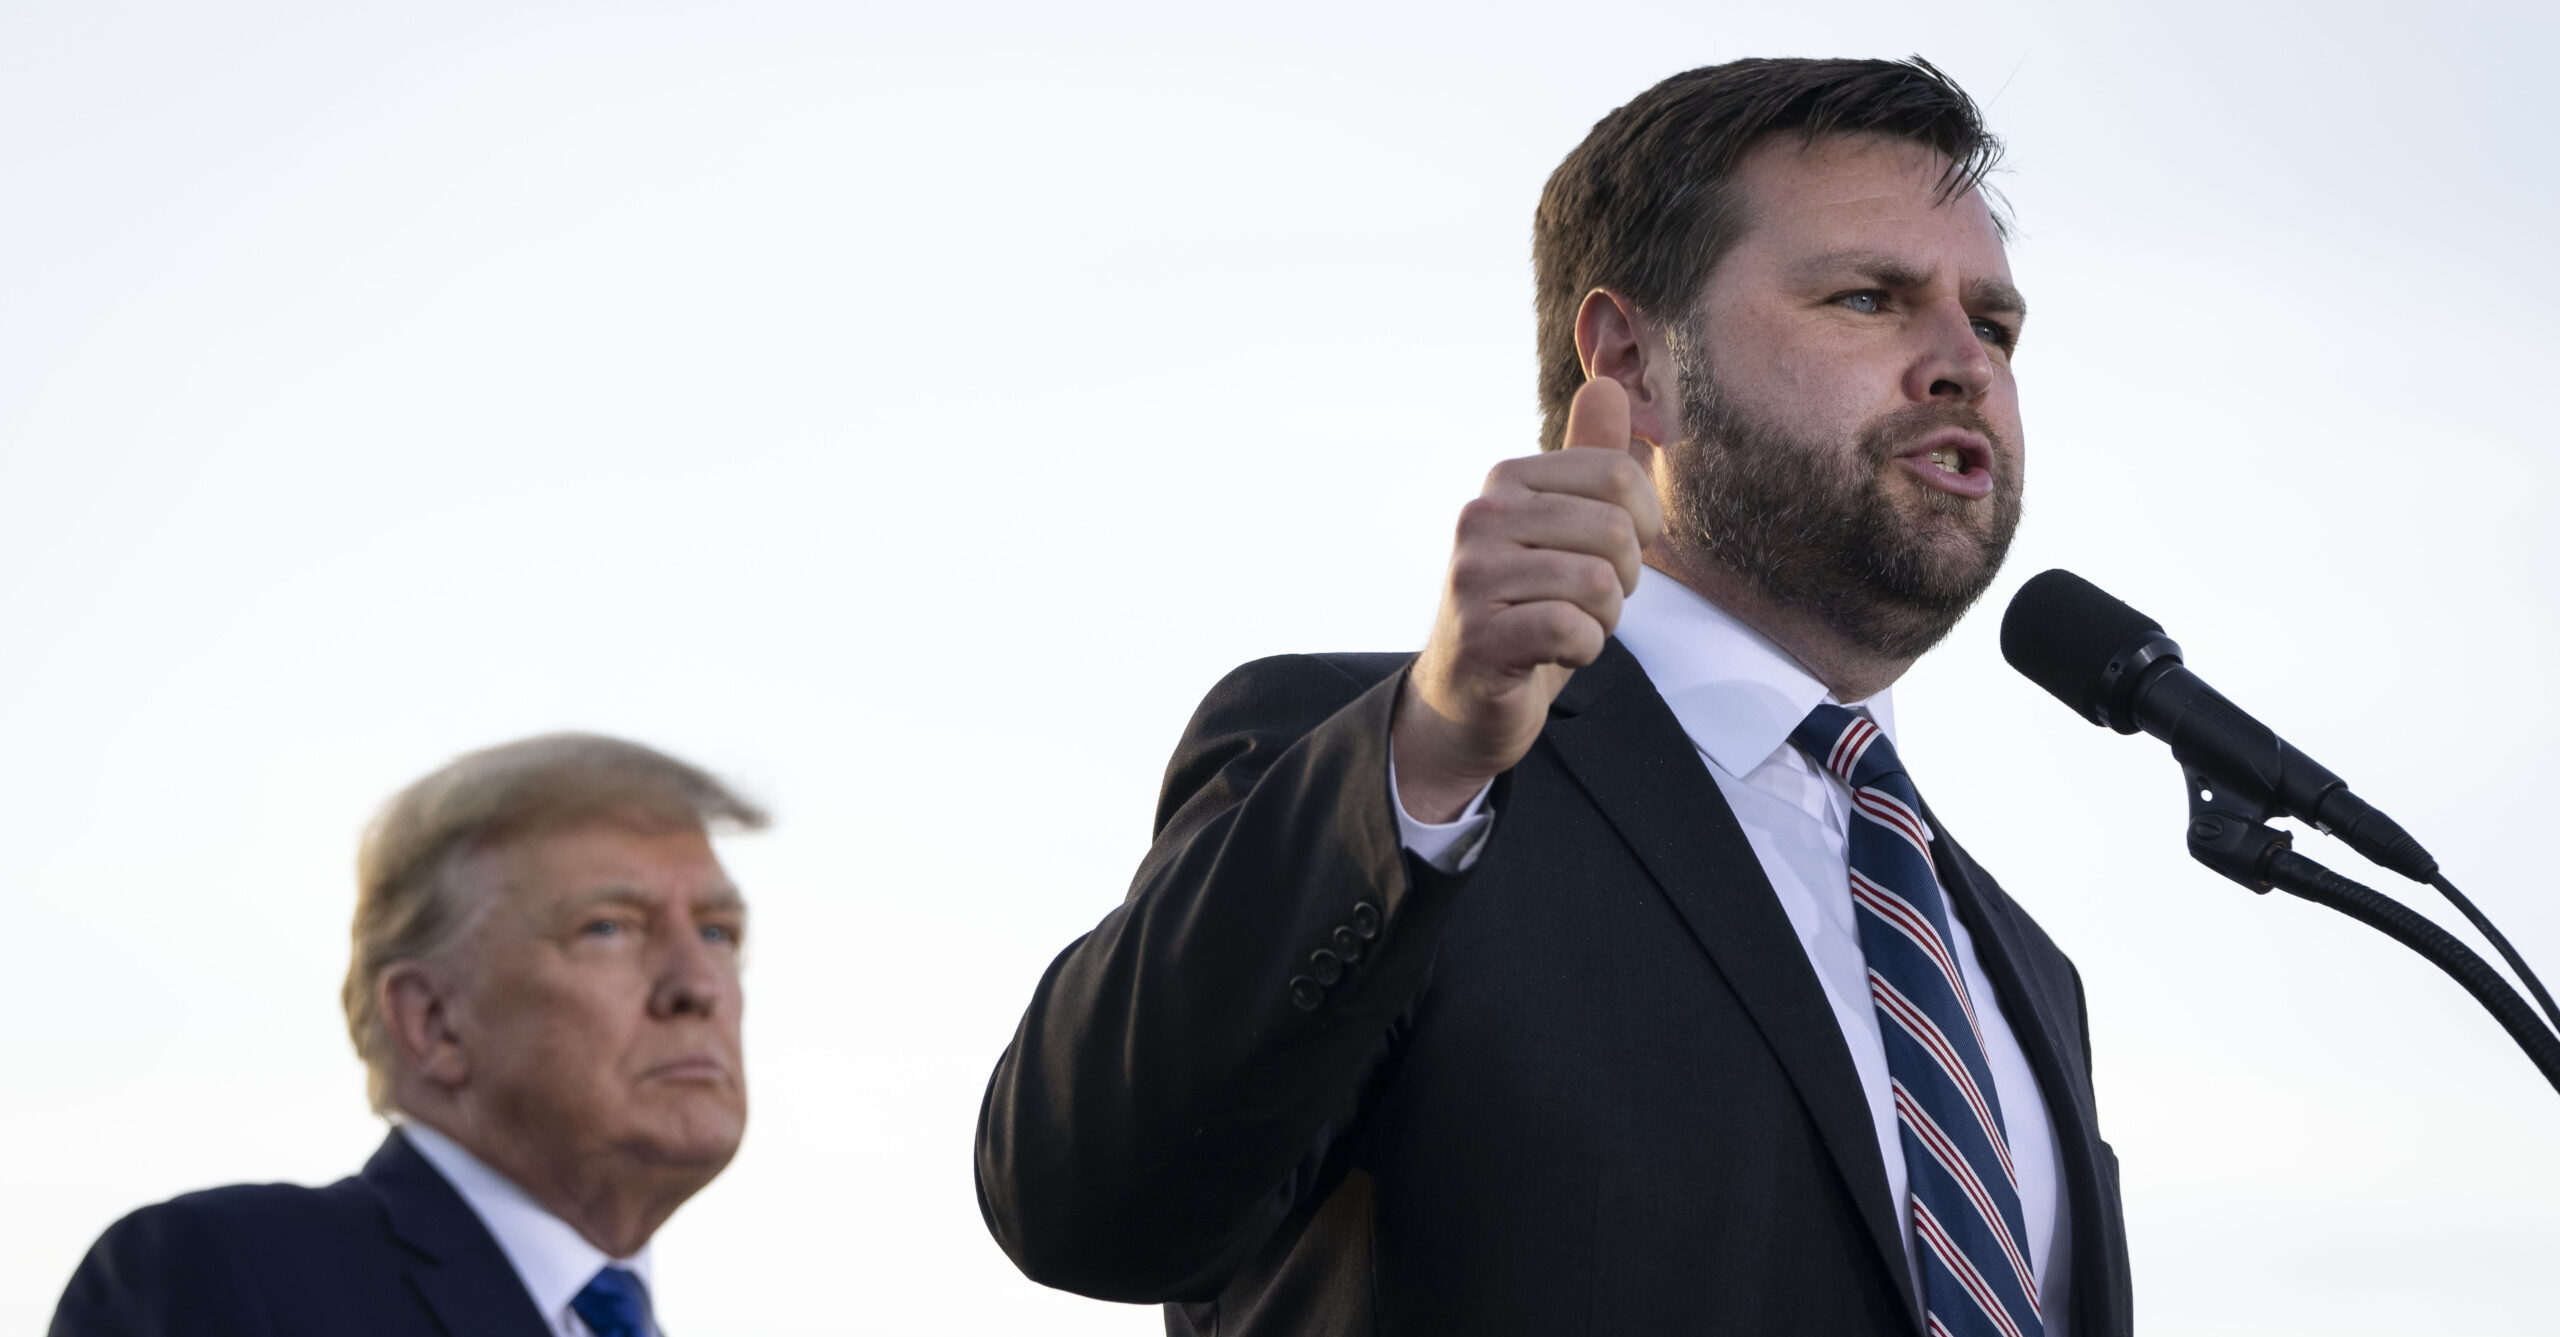 JD Vance Lead -- in Ohio in Poll From His Super PAC